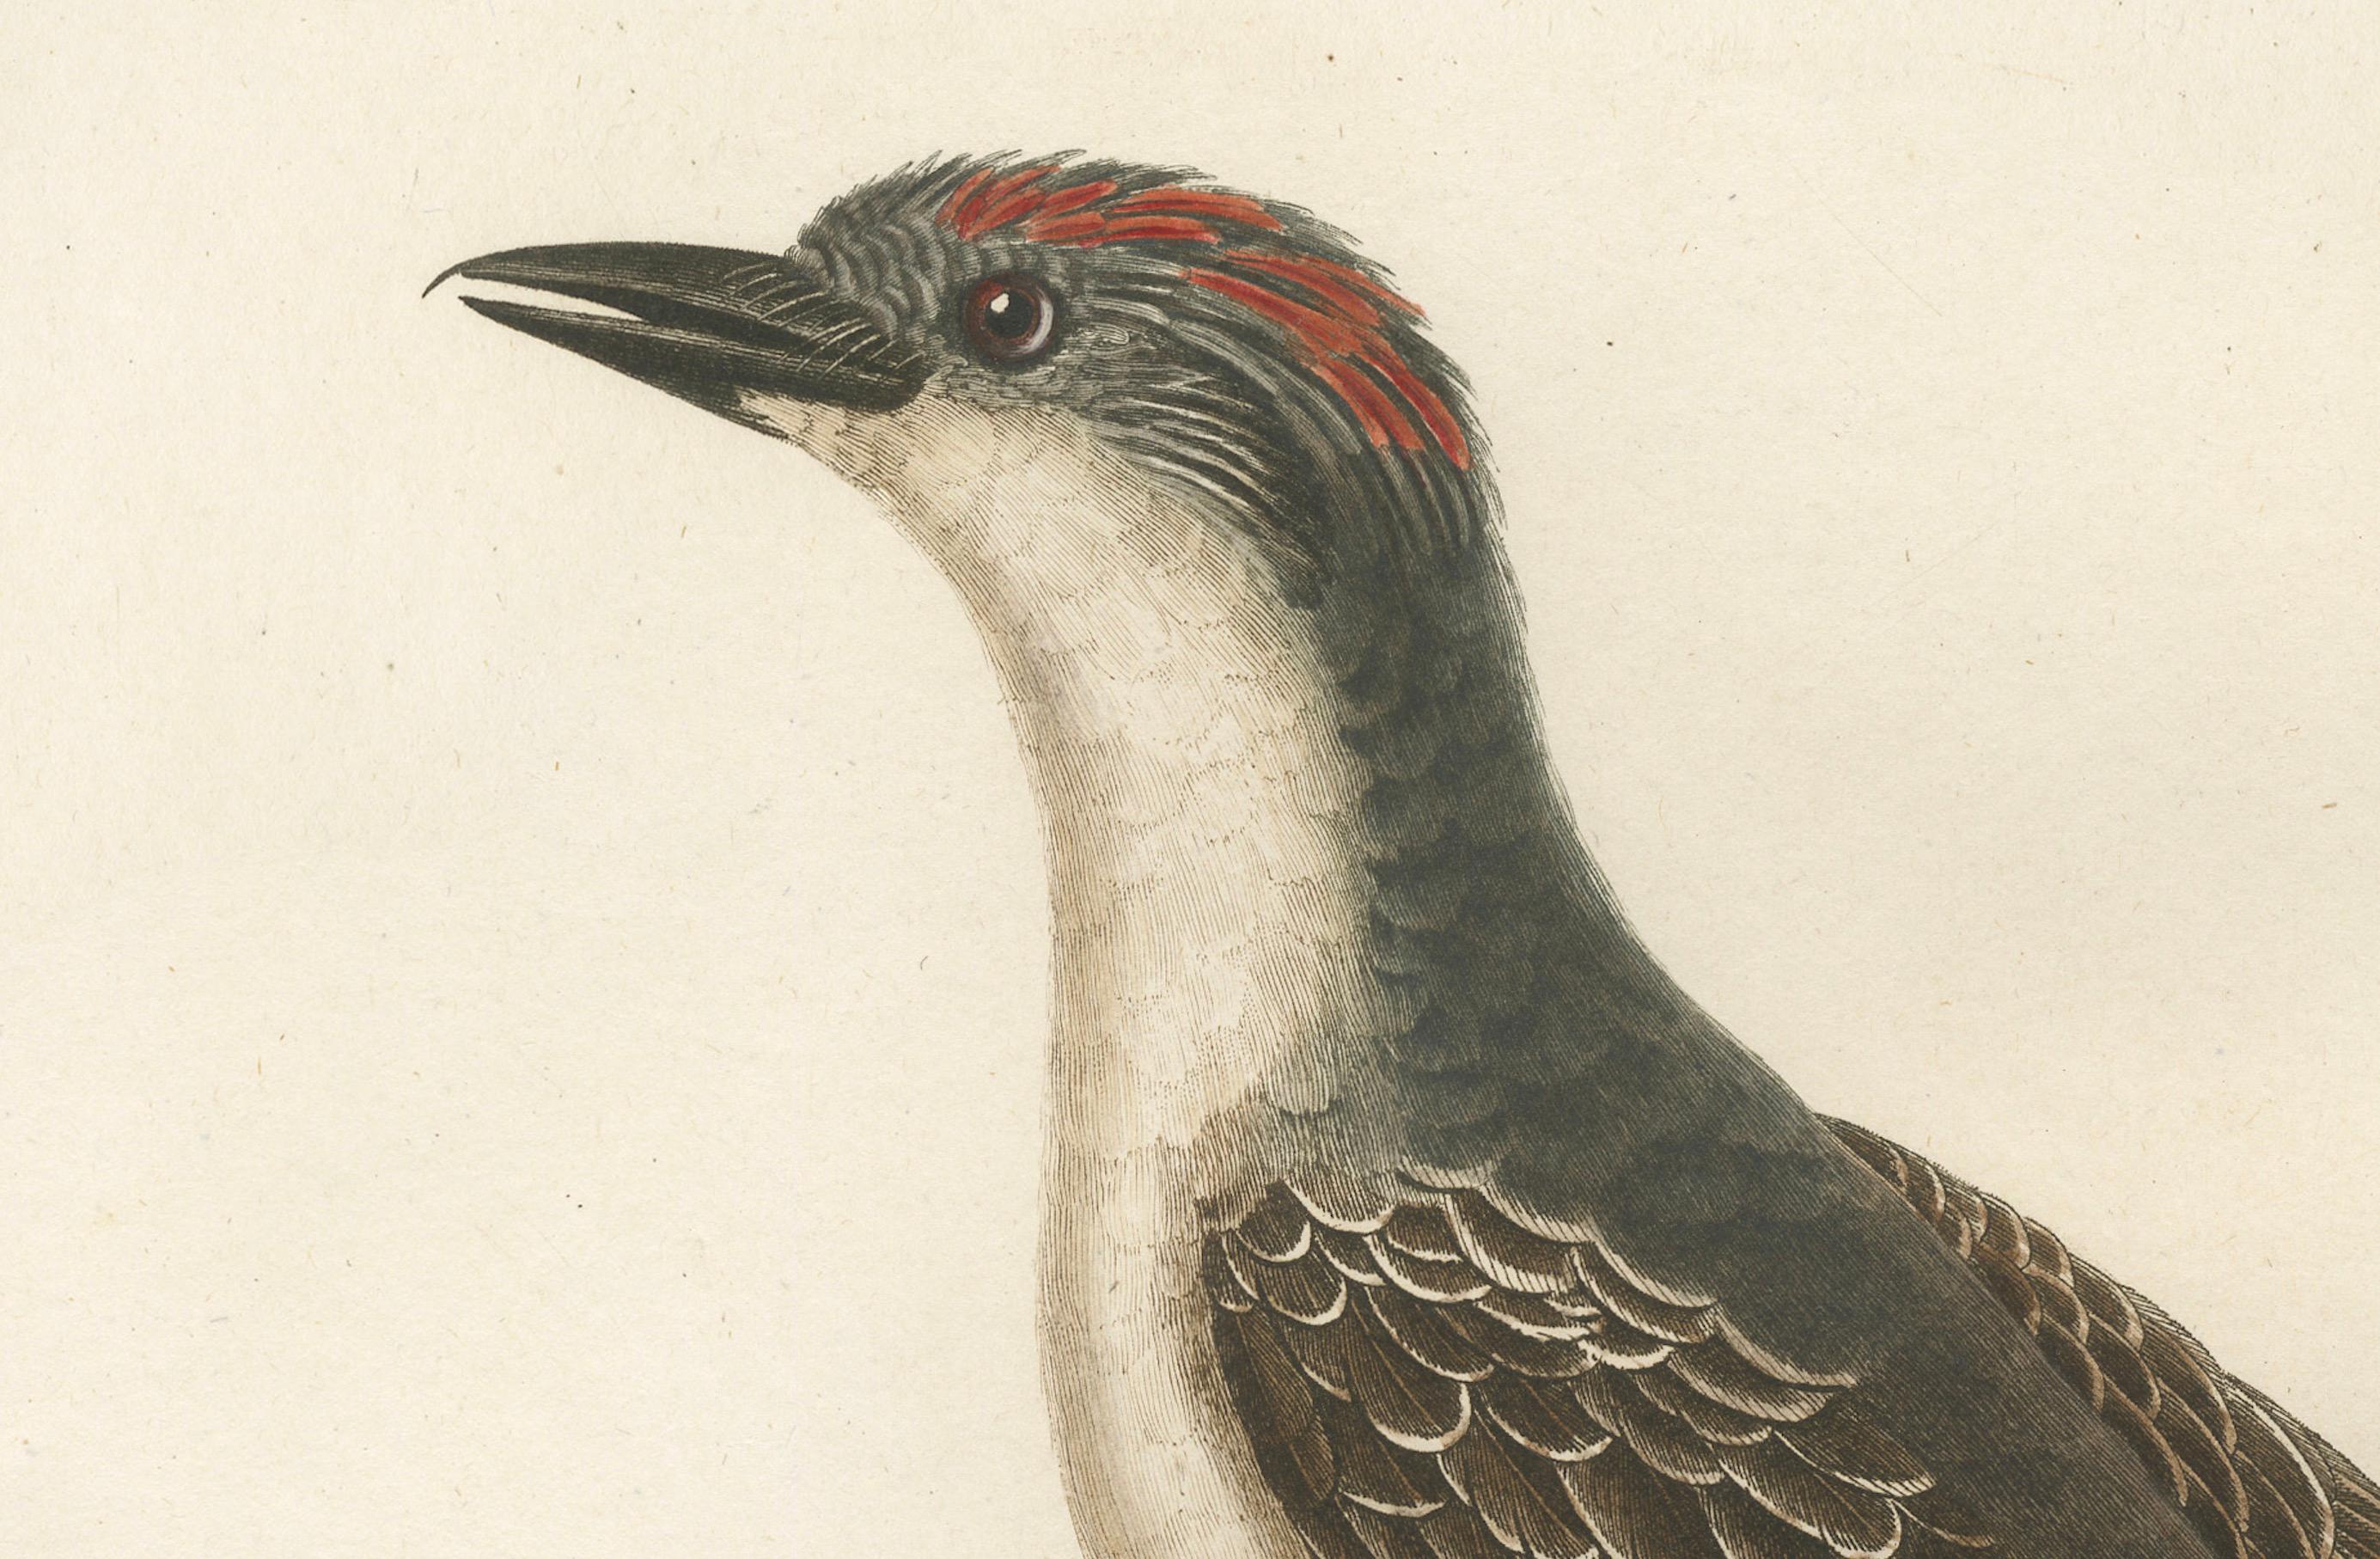 This handcolored antique print titled 'Le Tyran Gris' features the Gray Kingbird (Tyrannus dominicensis), a bird native to the Americas and recognized for its assertive behavior. The kingbird is presented in a poised posture on a branch, with its